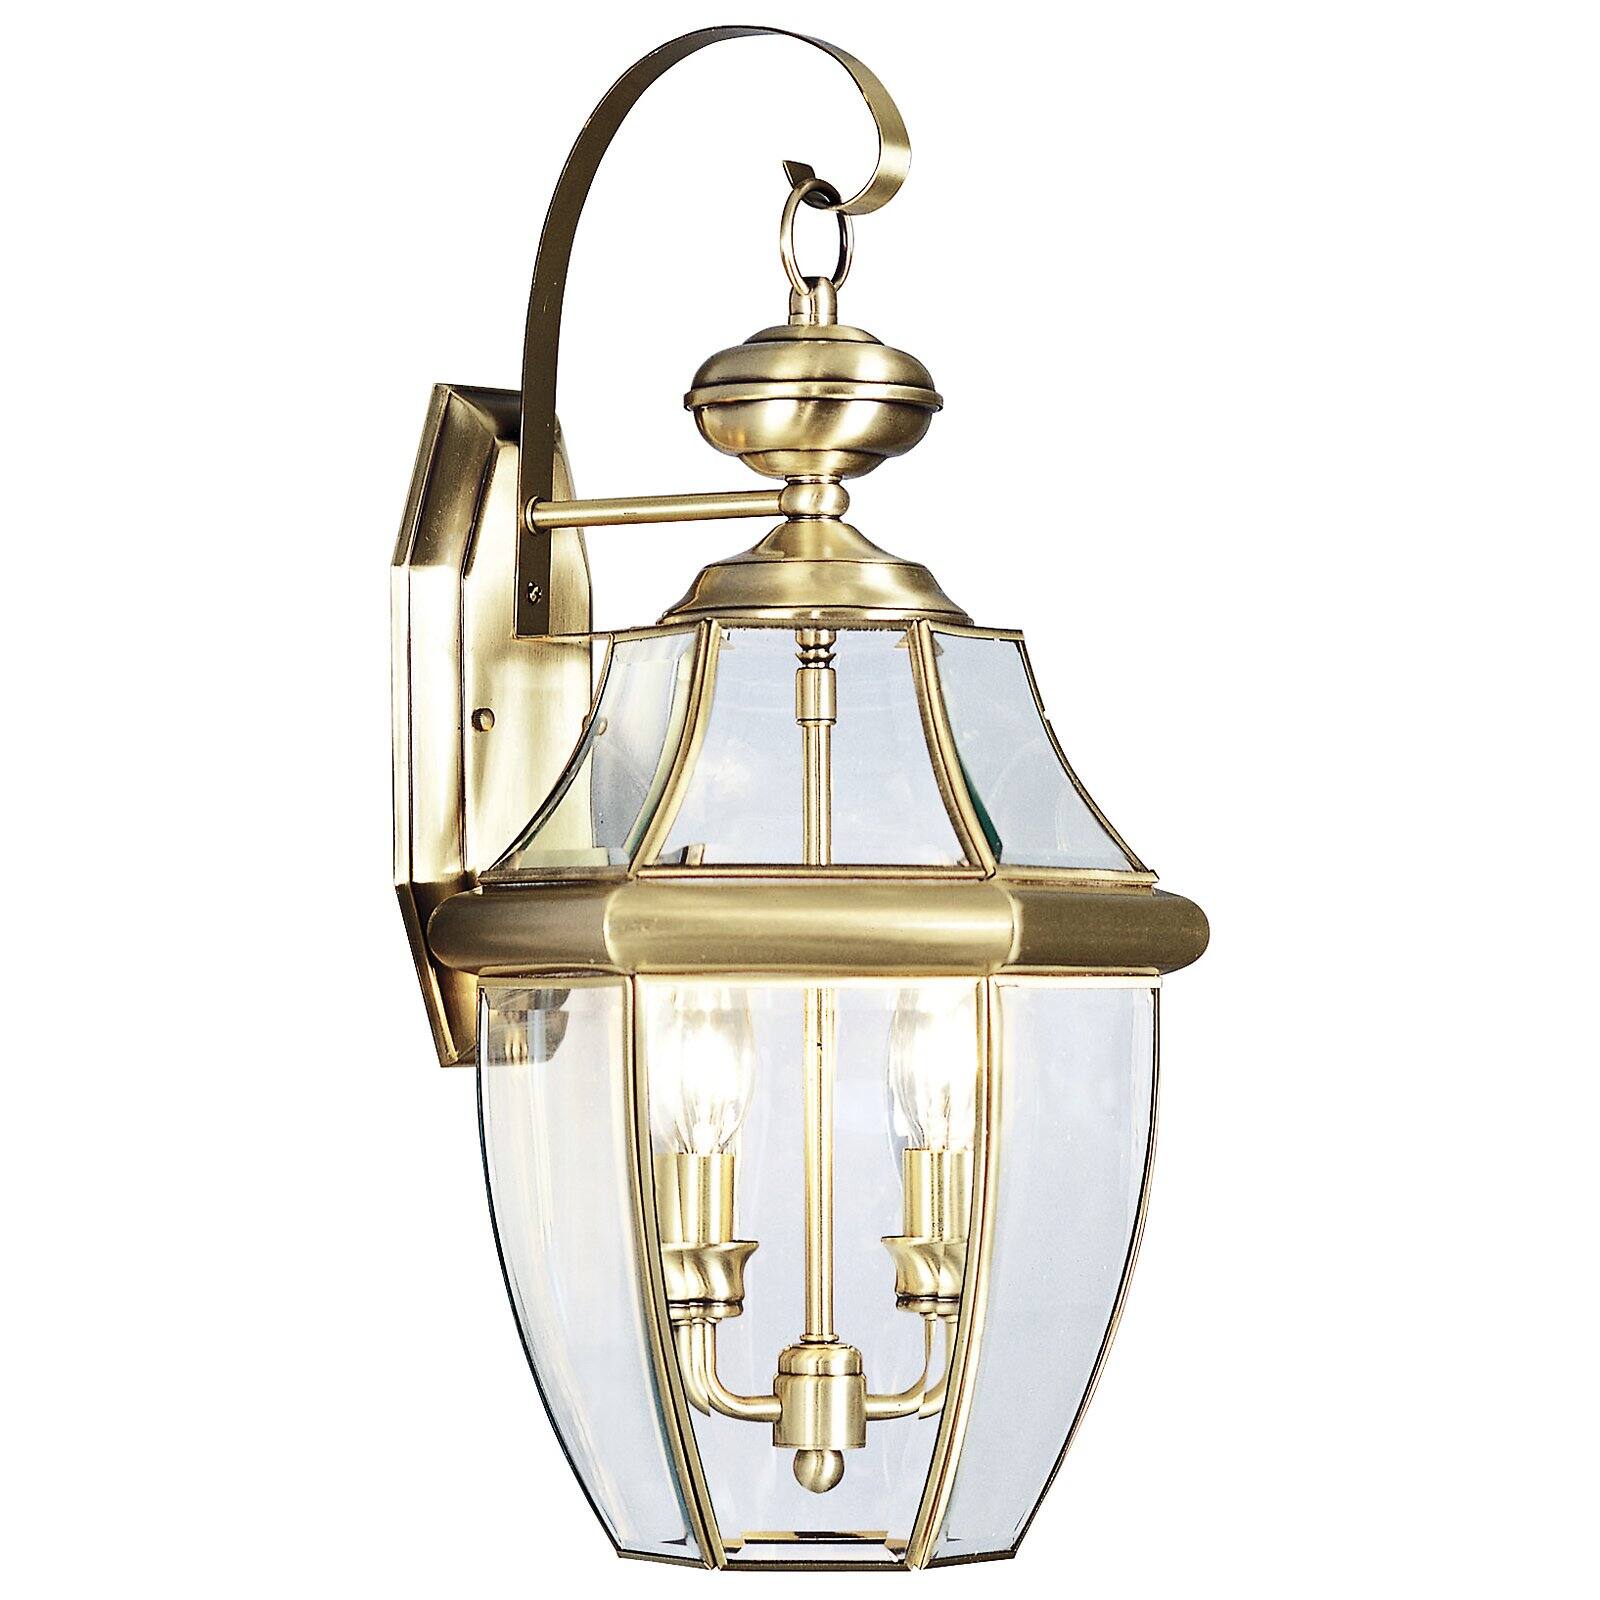 Livex Monterey 2251 Wall Lantern 20.25H in. - image 2 of 2